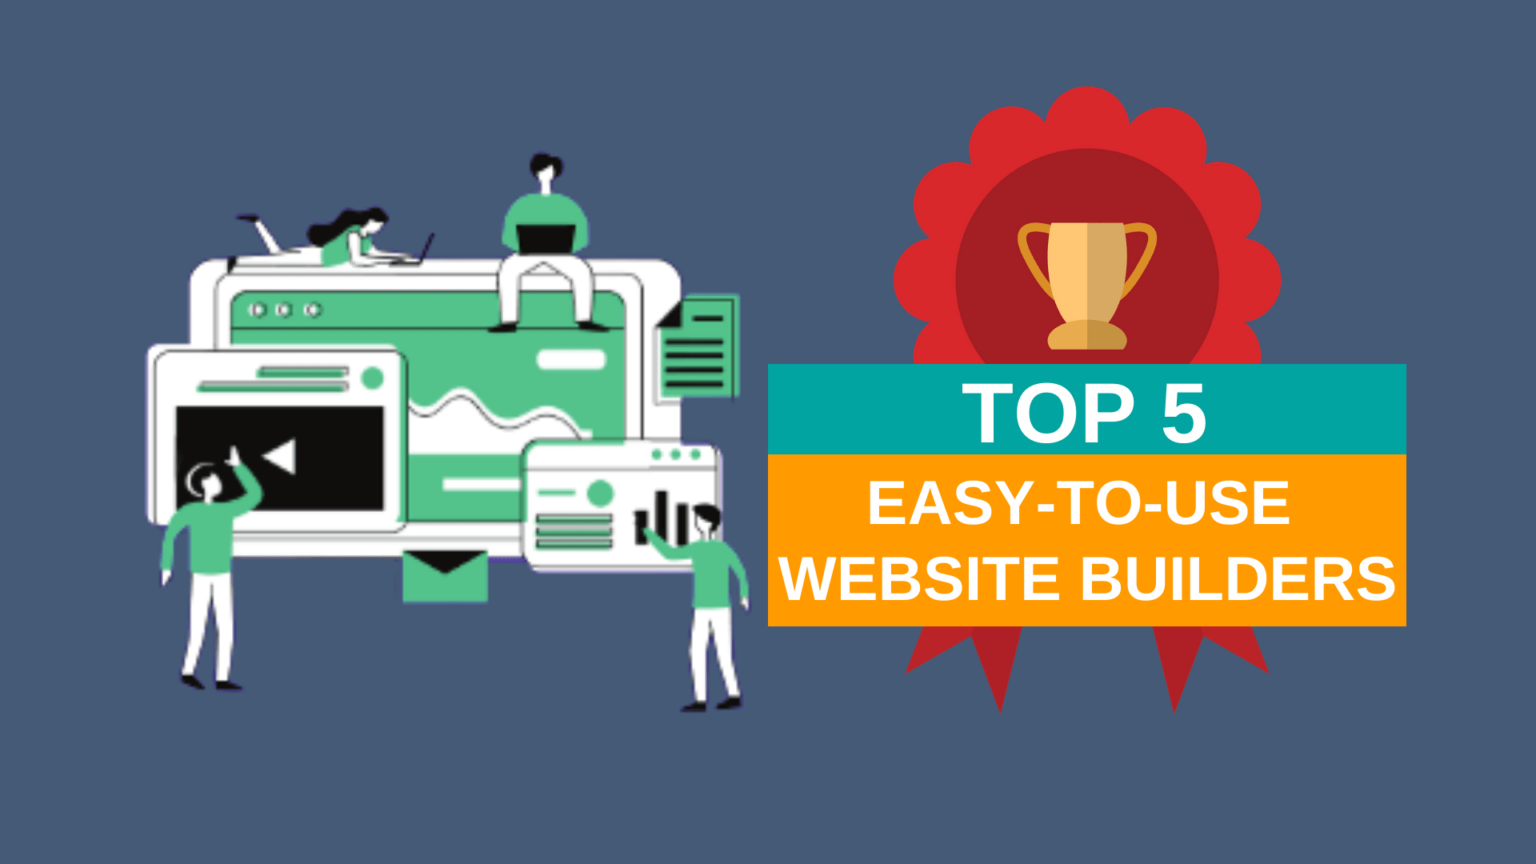 Top 5 easy-to-use websites builder.